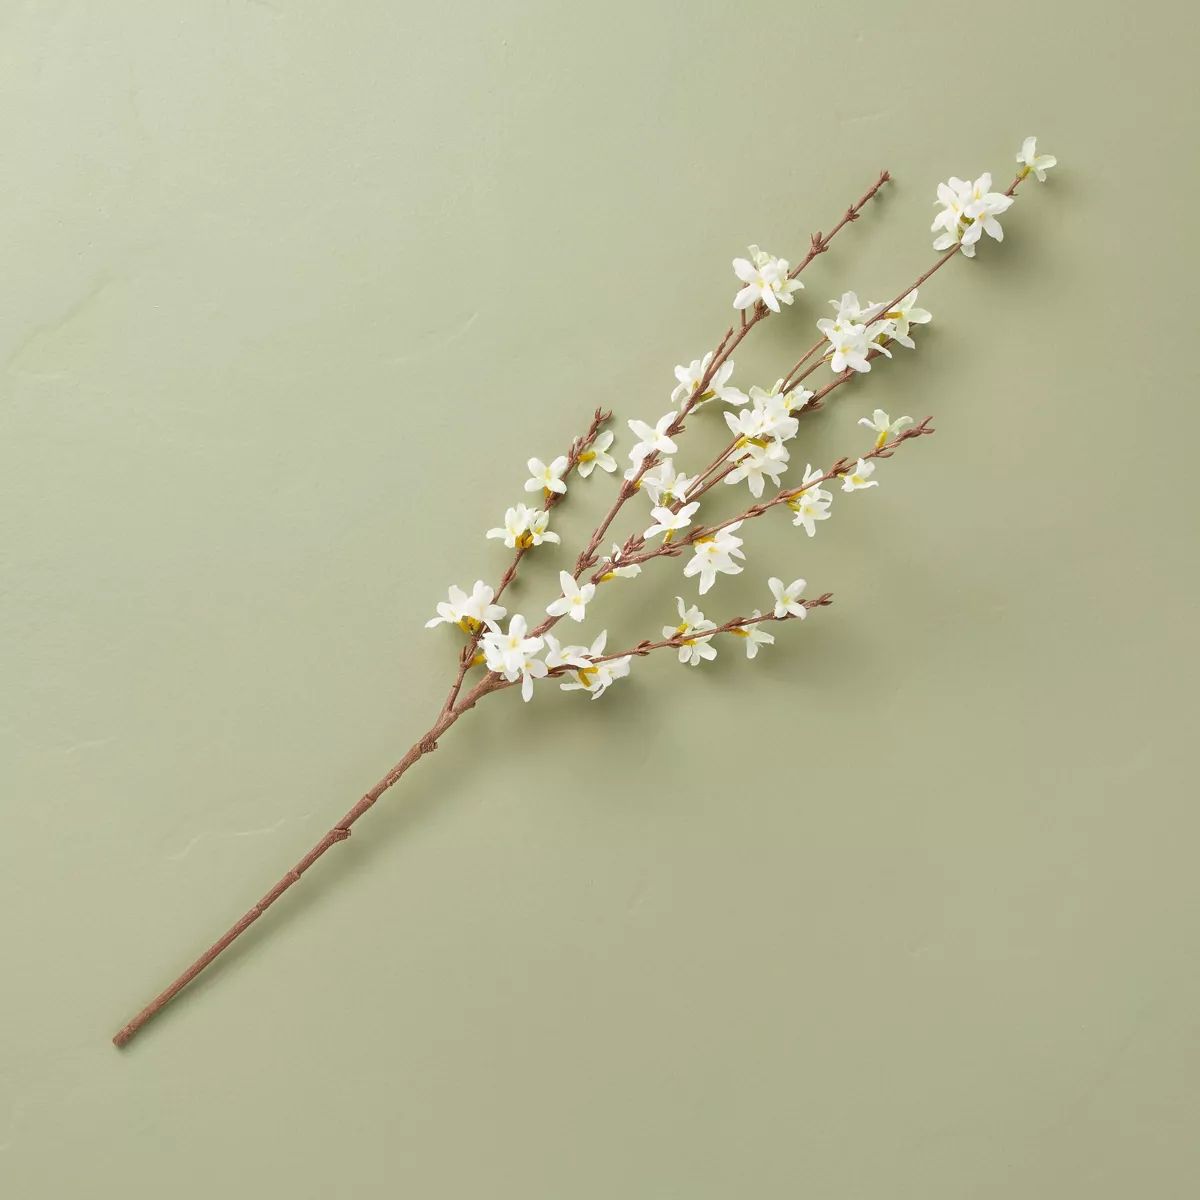 25" Faux Forsythia Flowering Branch - Hearth & Hand™ with Magnolia | Target